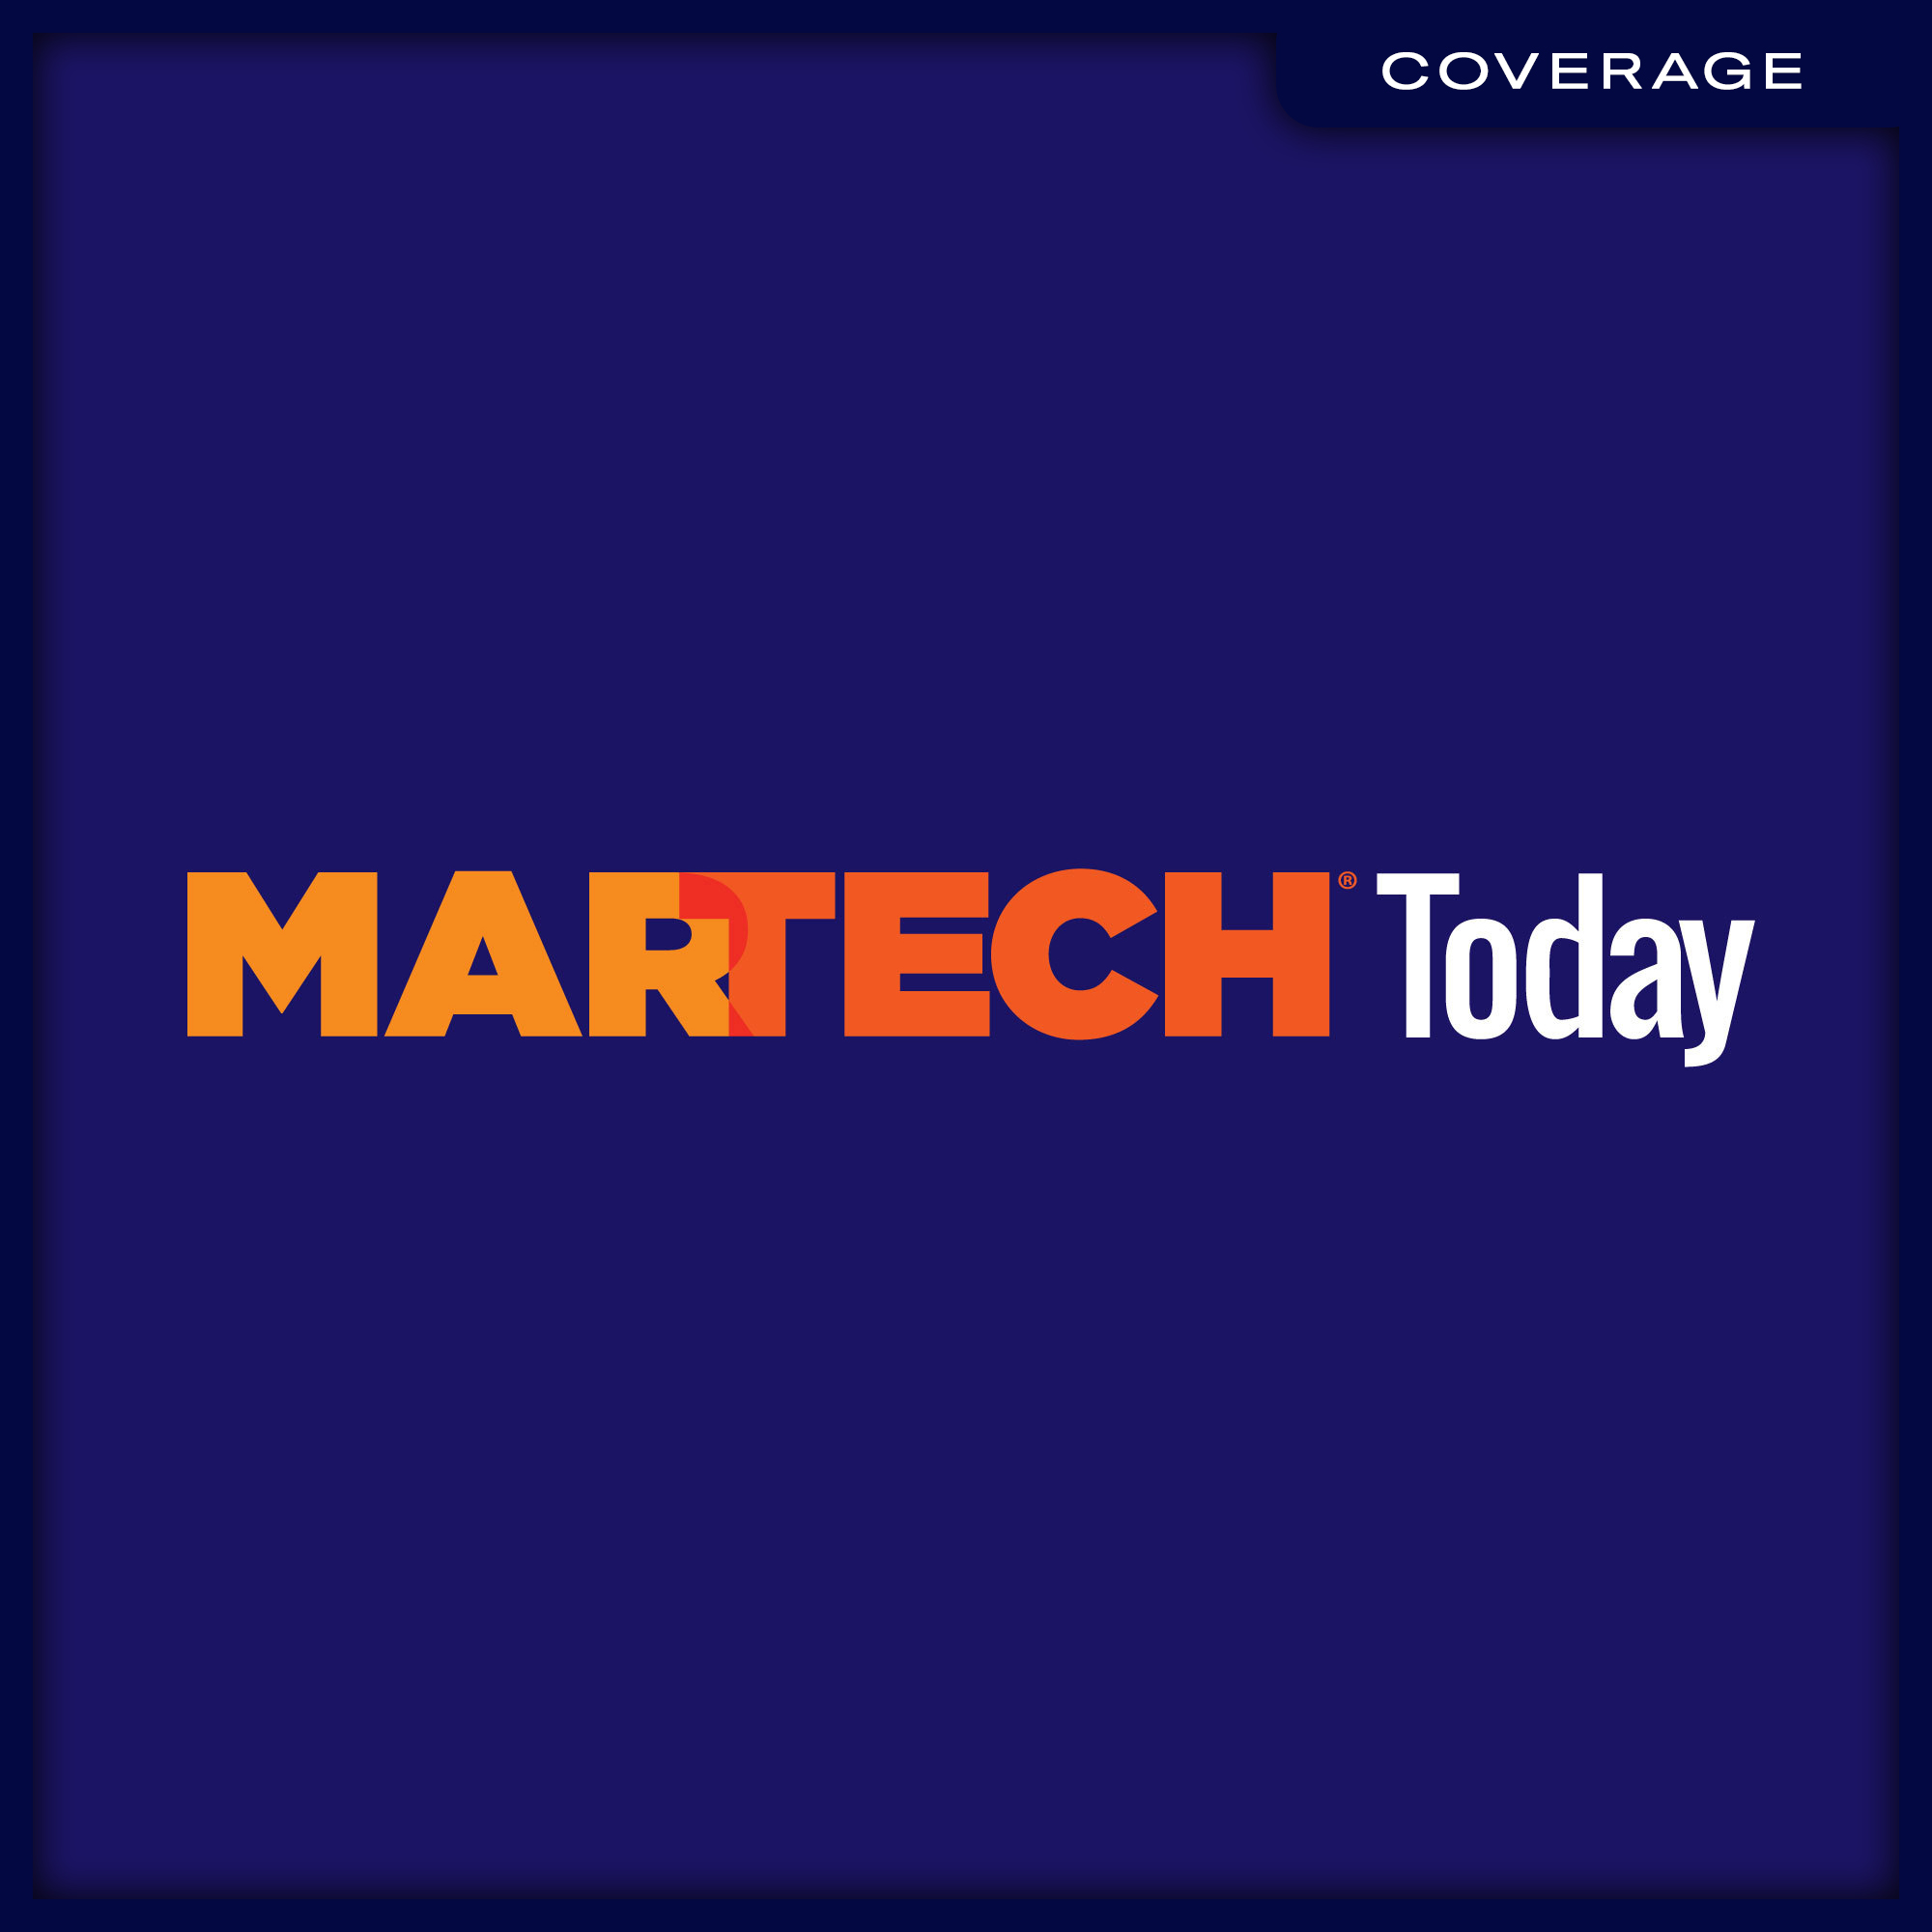 01_Coverage_martech-today-logo